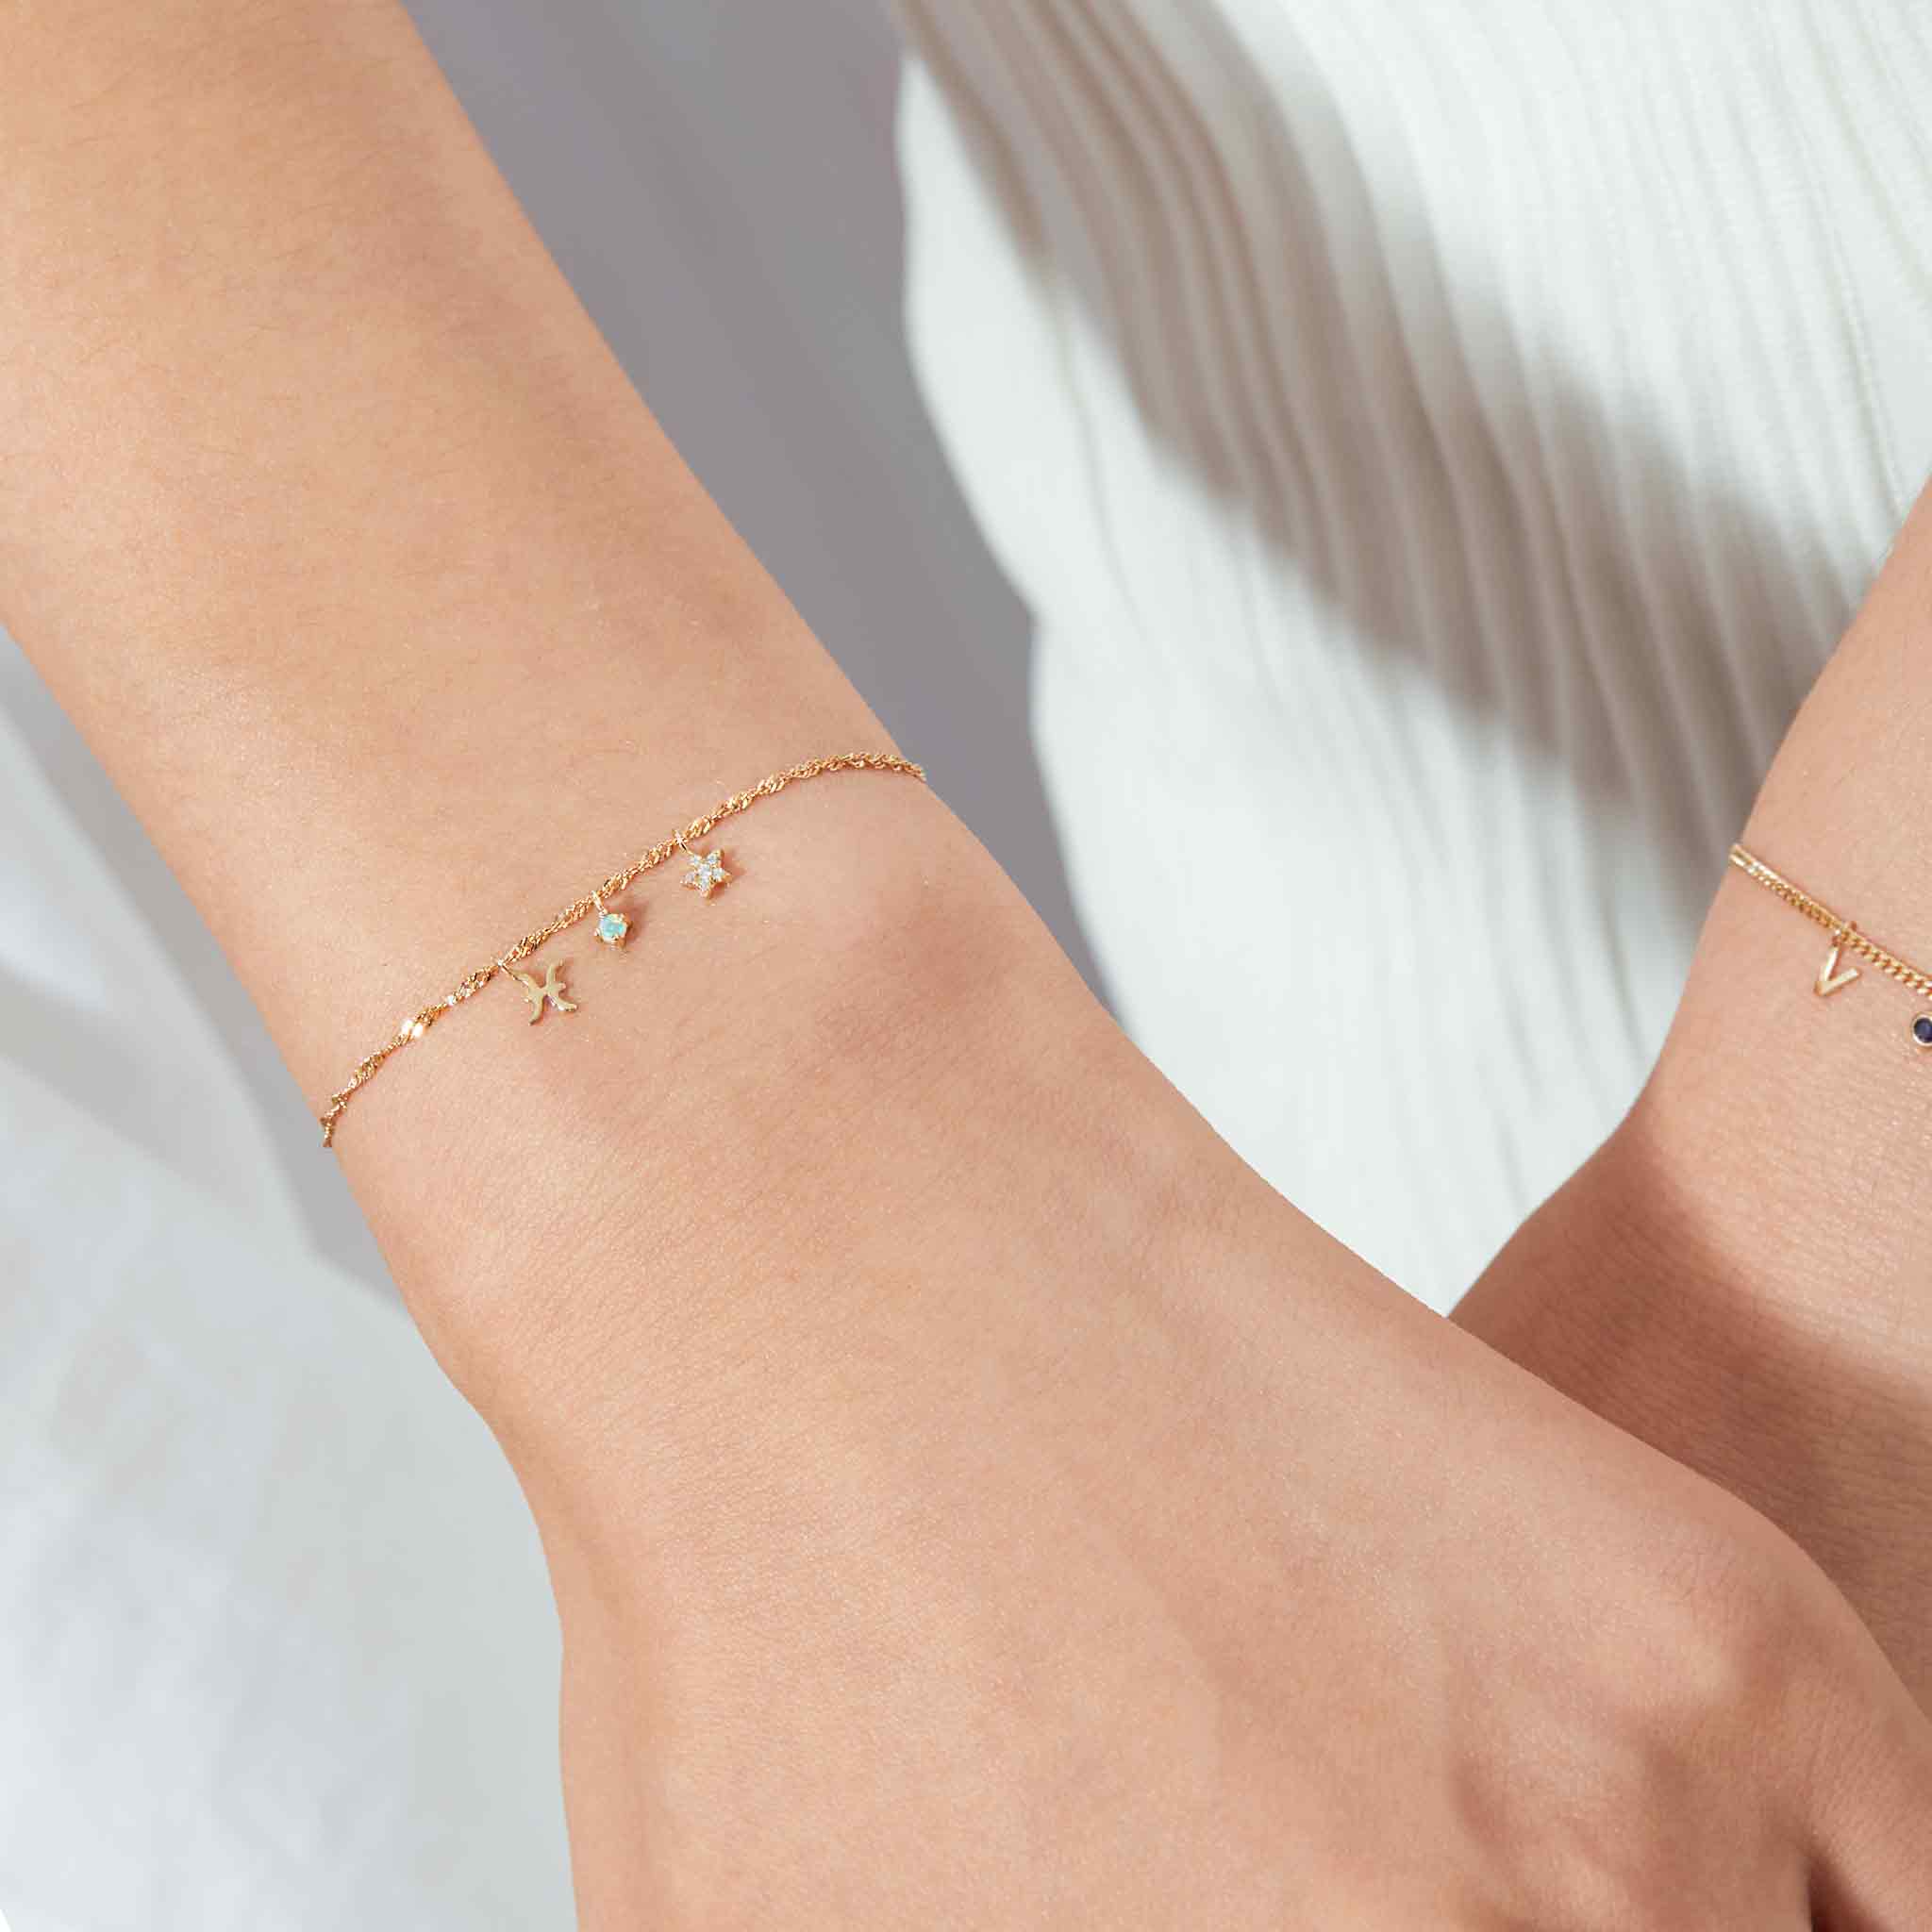 Shop the Best Personalized Jewelry for Mother's Day